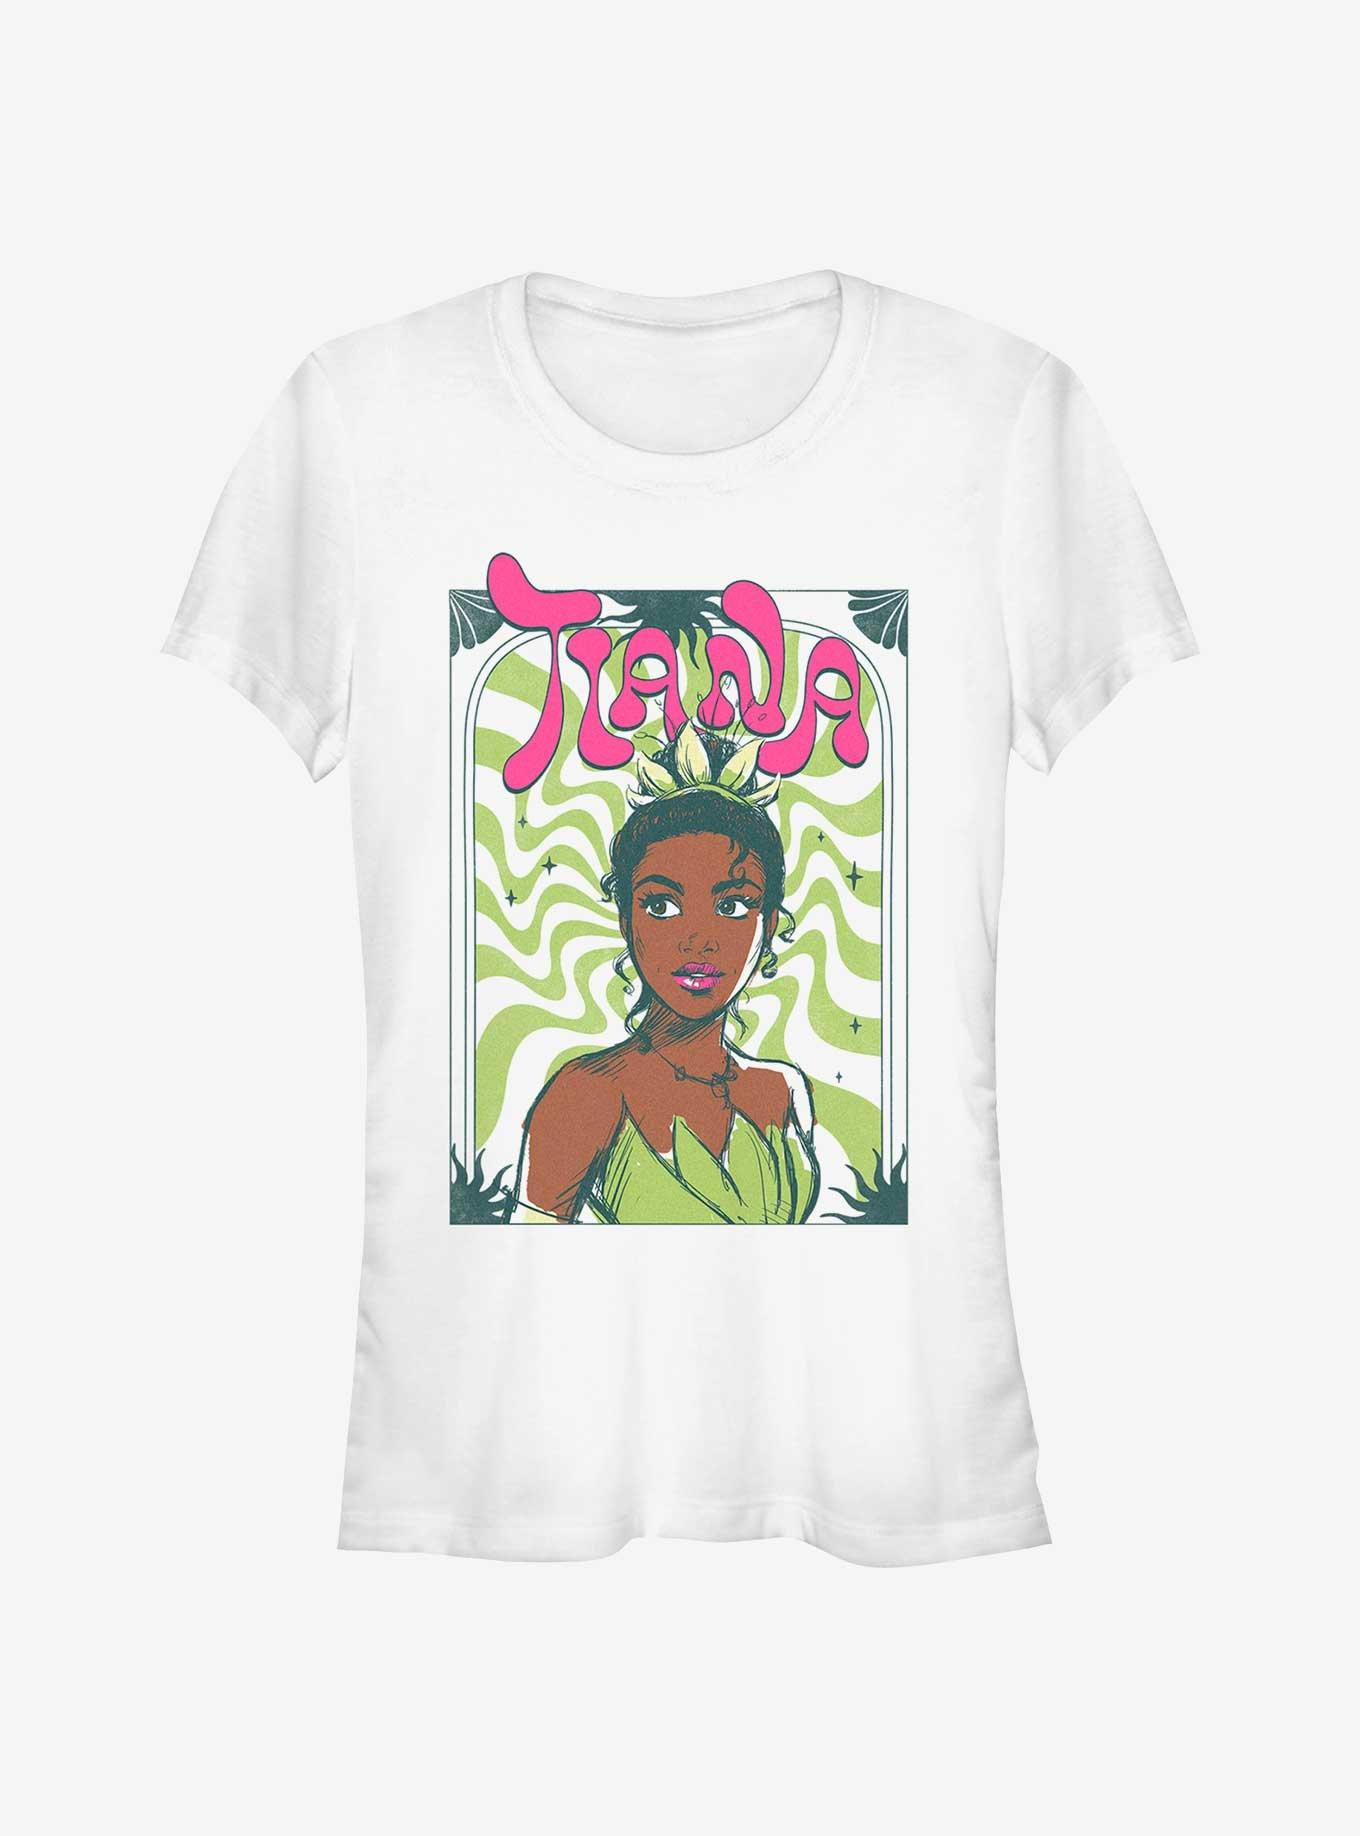 Disney Princess And The Frog Groovy Tiana Girls T-Shirt, WHITE, hi-res